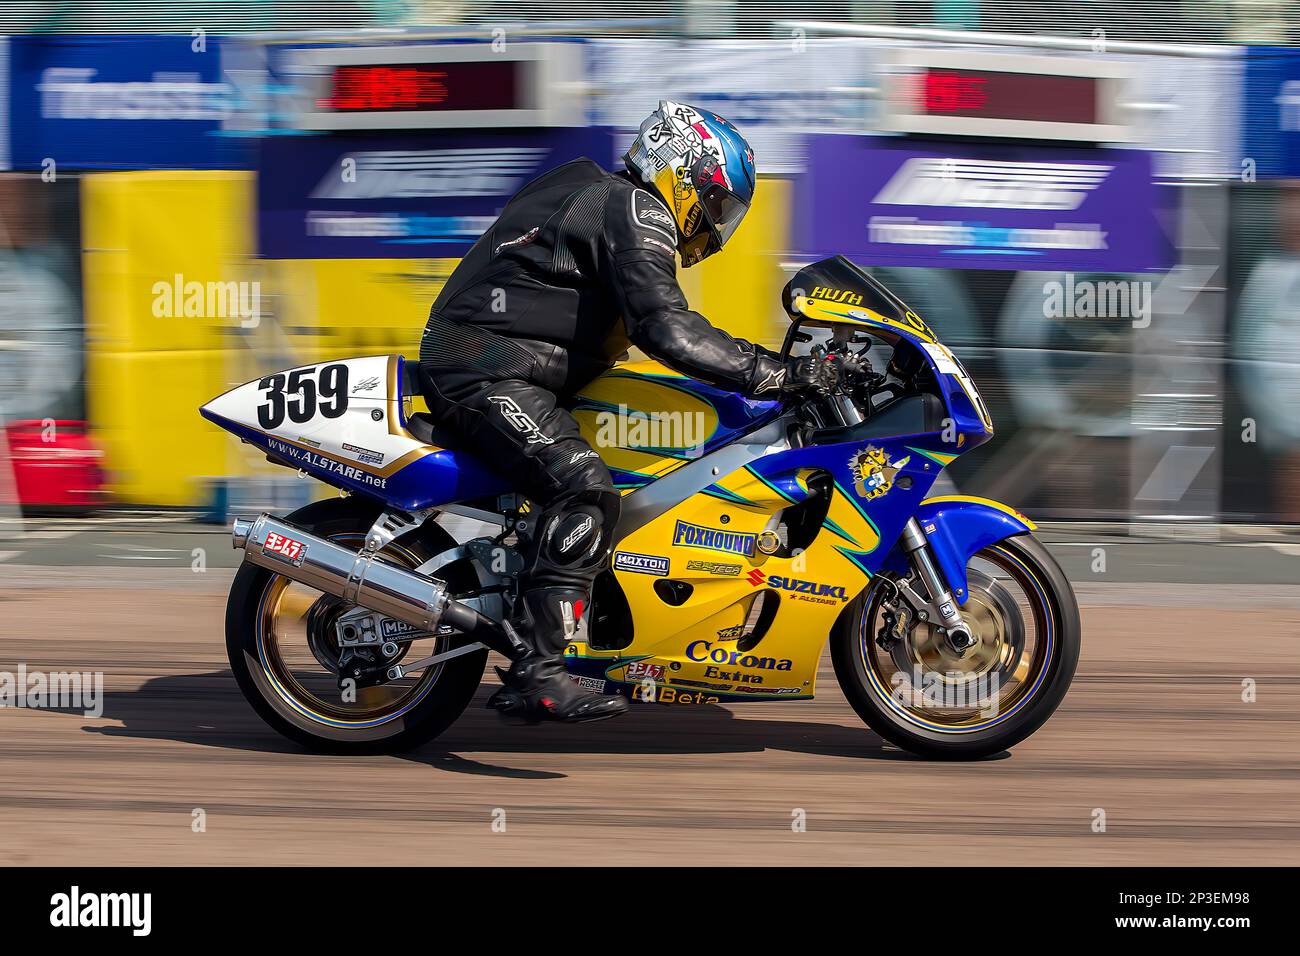 The event is currently run as a quarter mile sprint for both cars and motorcycles, held under the auspices of the Motor Sports Association. This image features Adie Therin riding a Suzuki GS1000E. The event is organised by the Brighton and Hove Motor Club run along Madeira Drive, Brighton Sea Front, City of Brighton & Hove, UK. 2nd September 2017 Stock Photo